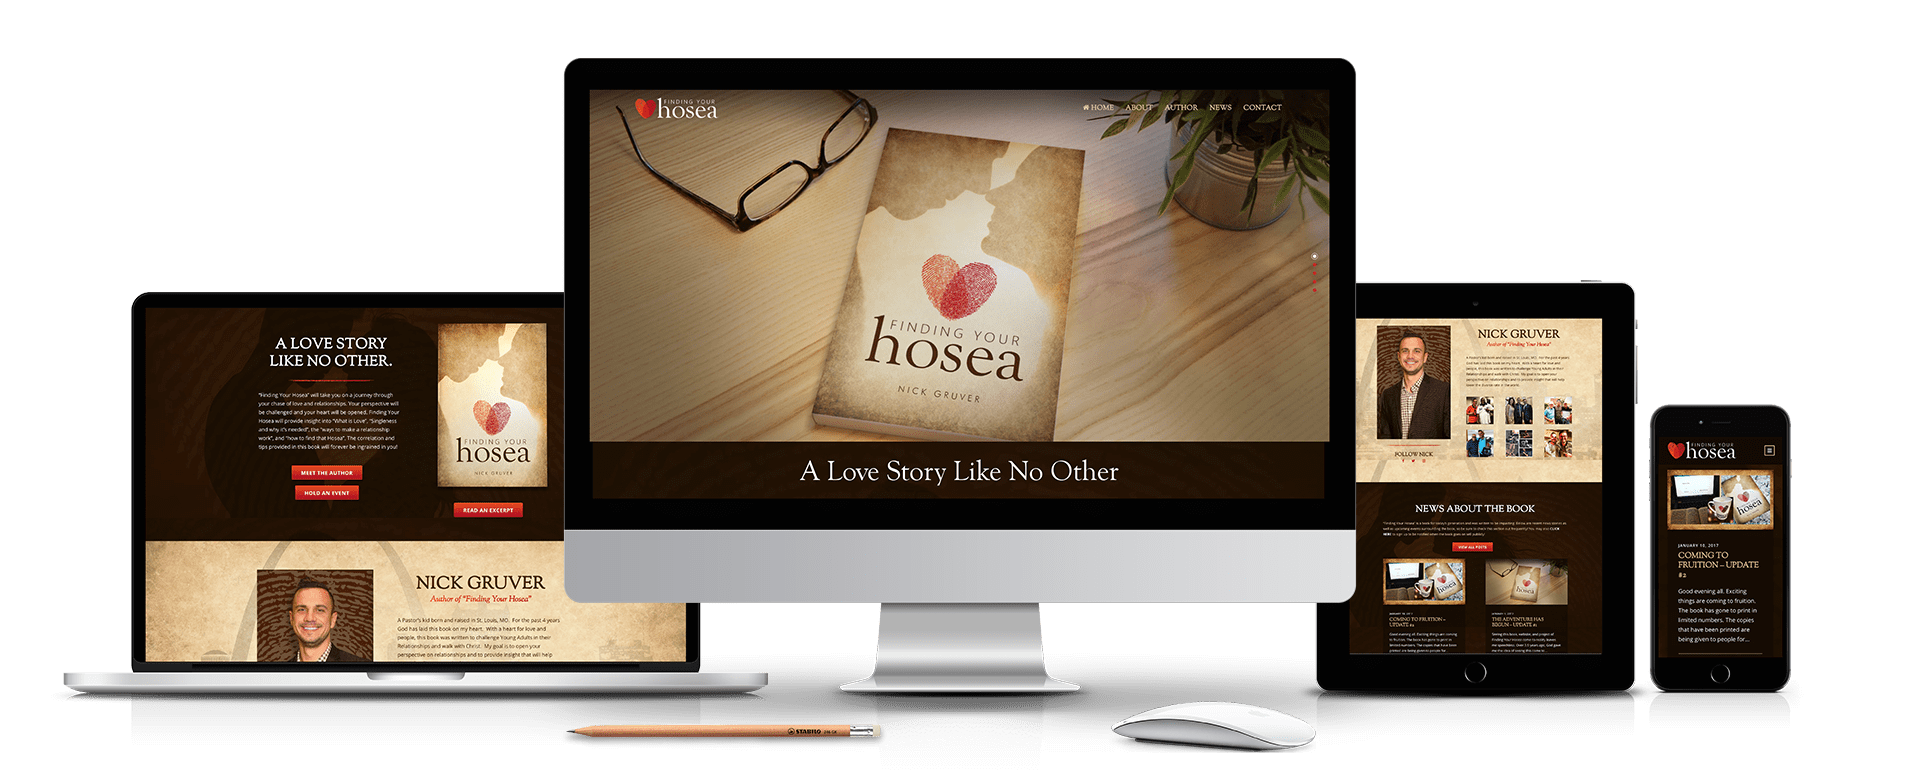 Finding Your Hosea